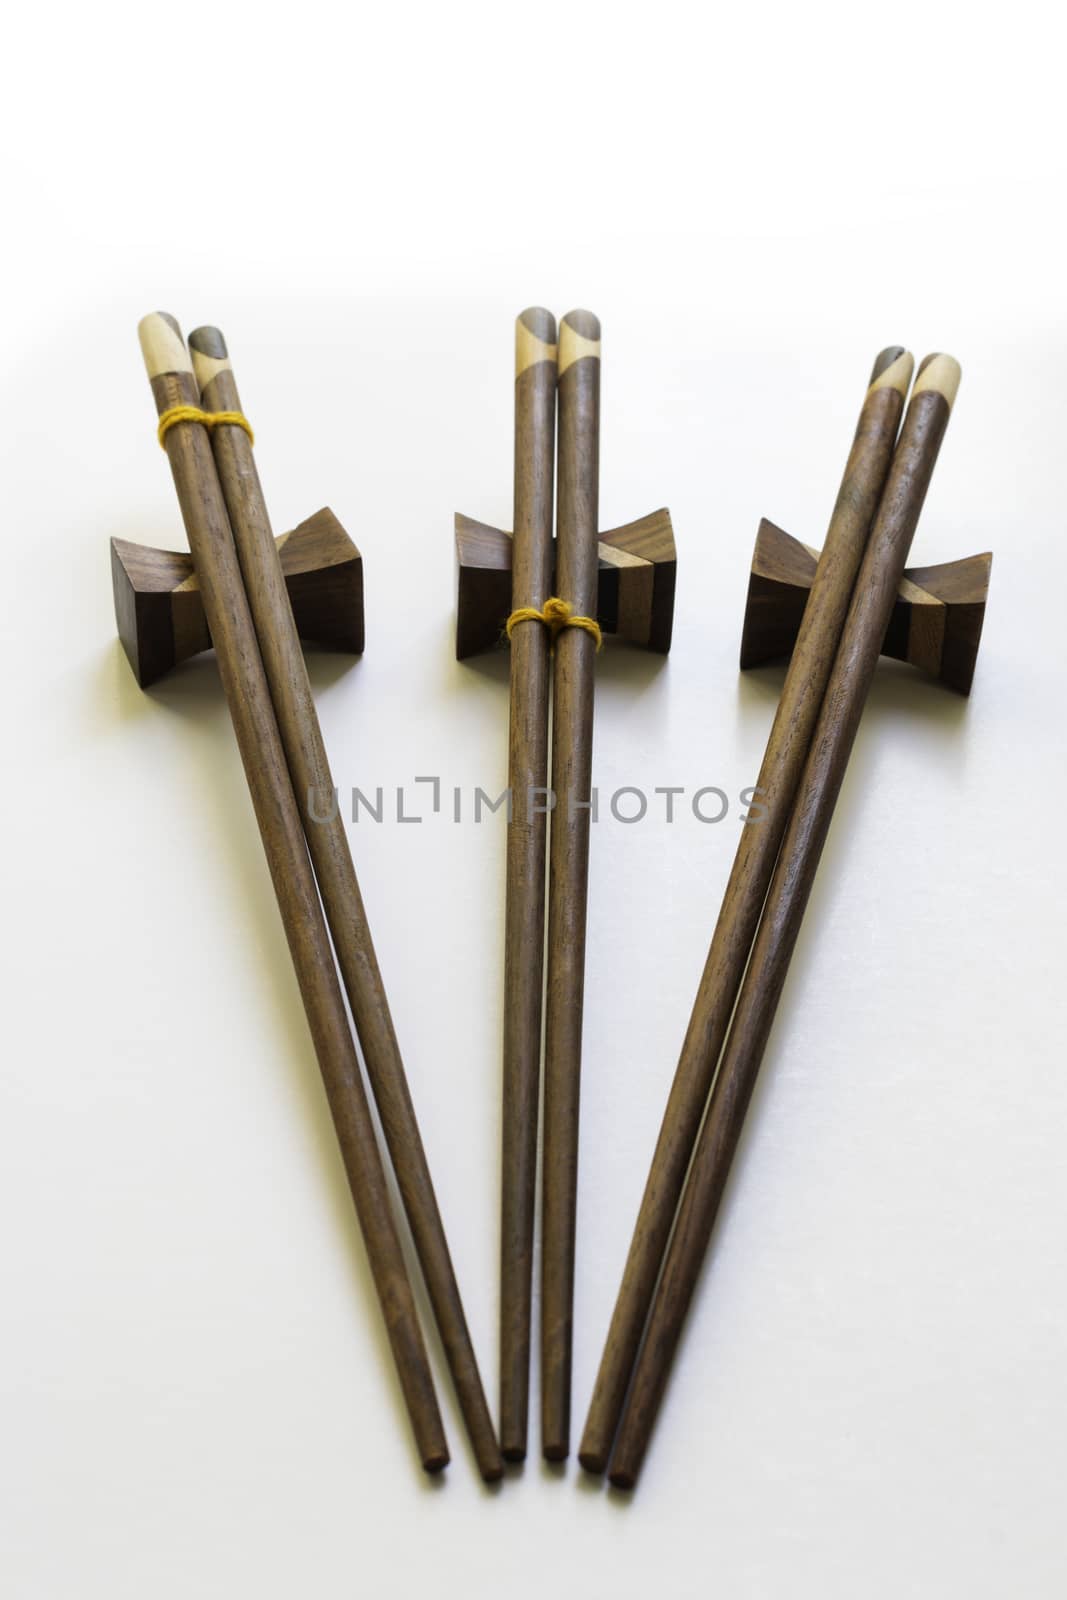 set of chinese chopsticks on a white background